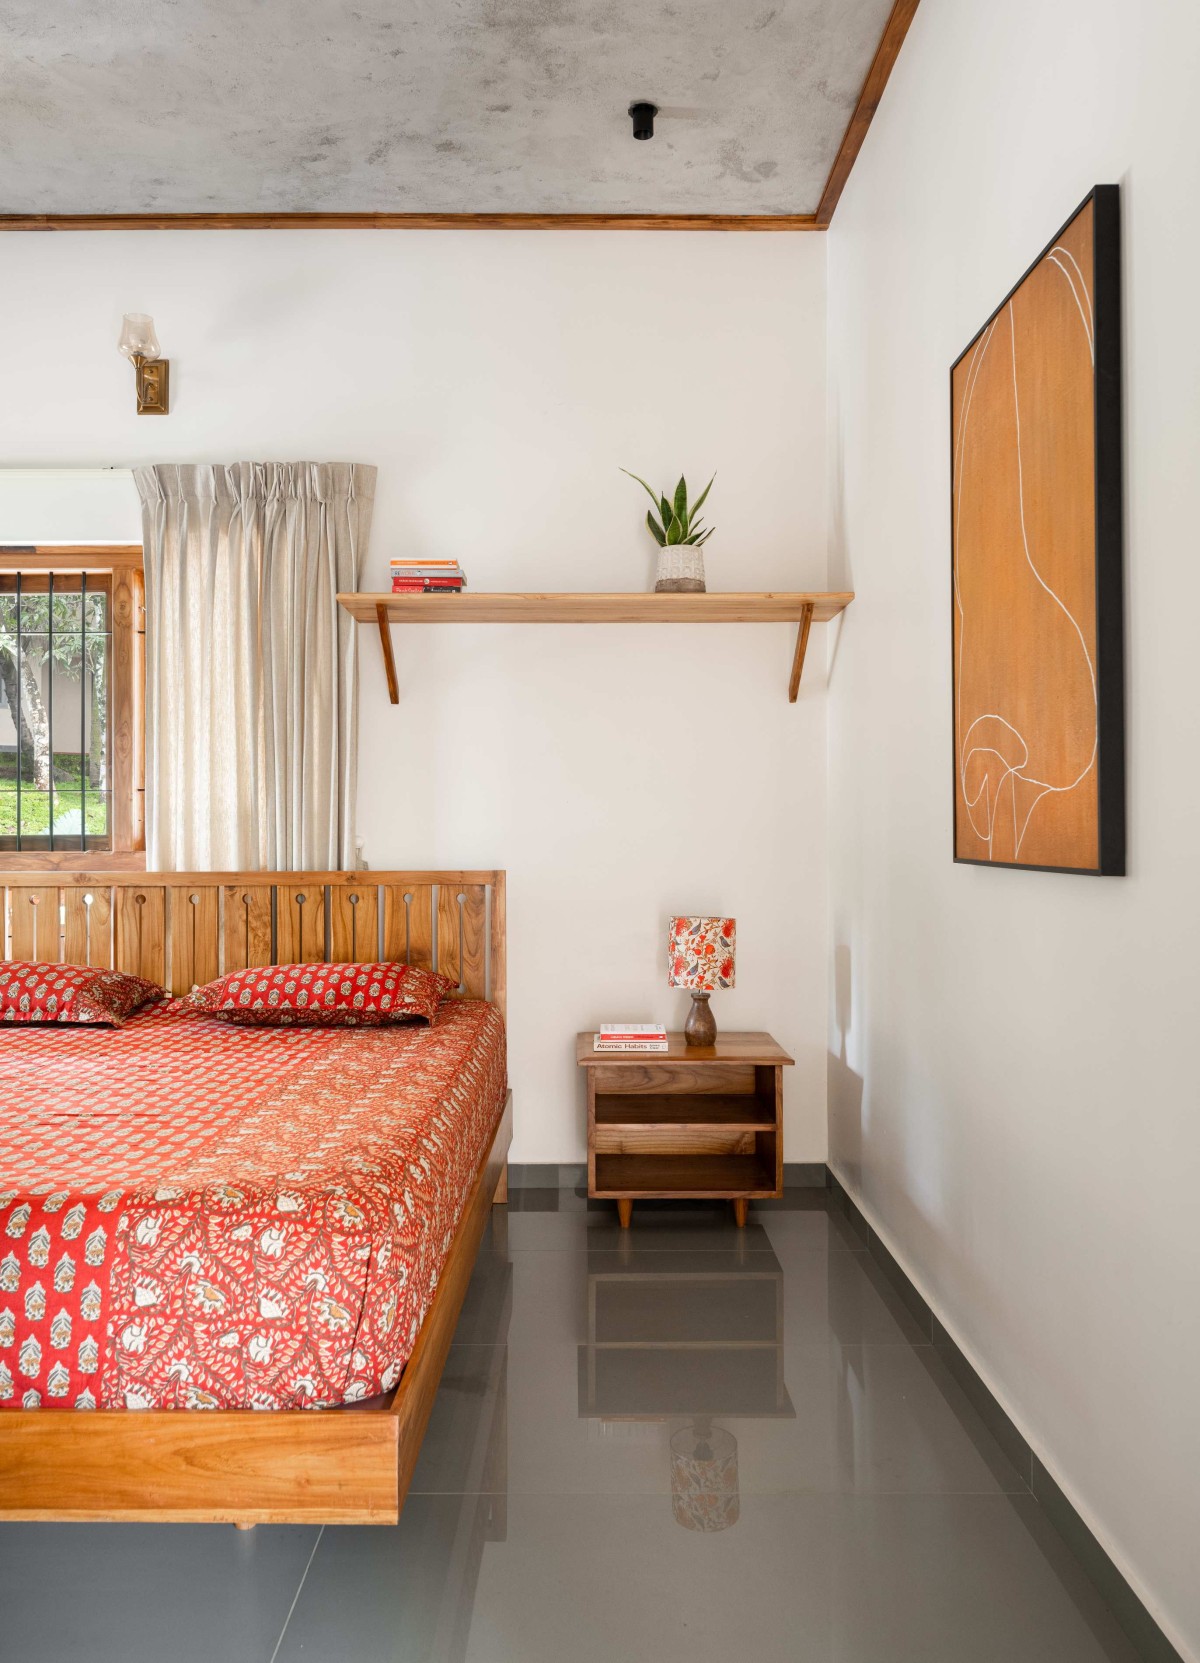 Bedroom 2 of Zikr by Barefoot Architects